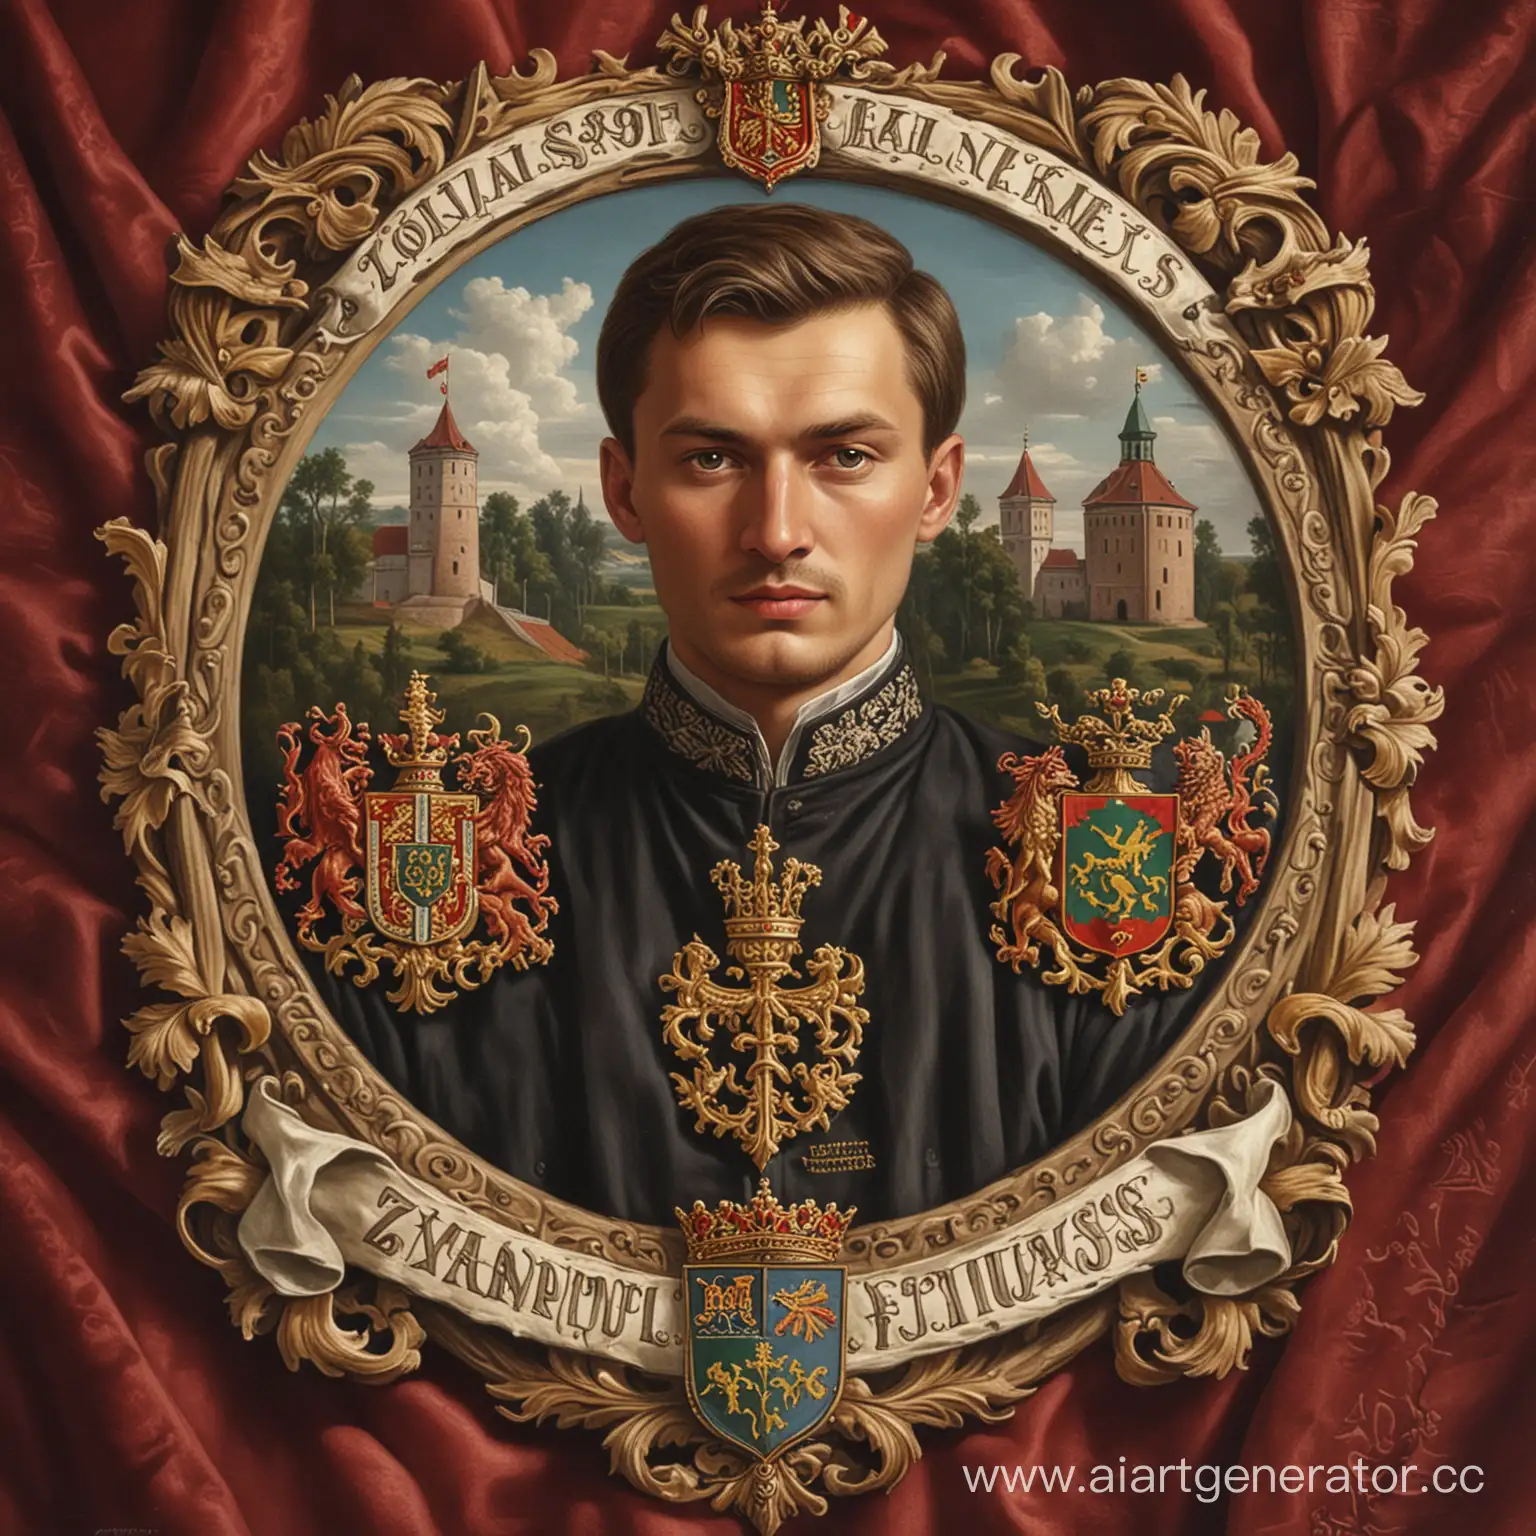 Belarusian-Nobleman-of-the-Grand-Duchy-of-Lithuania-with-Zmitrowicz-Family-Coat-of-Arms